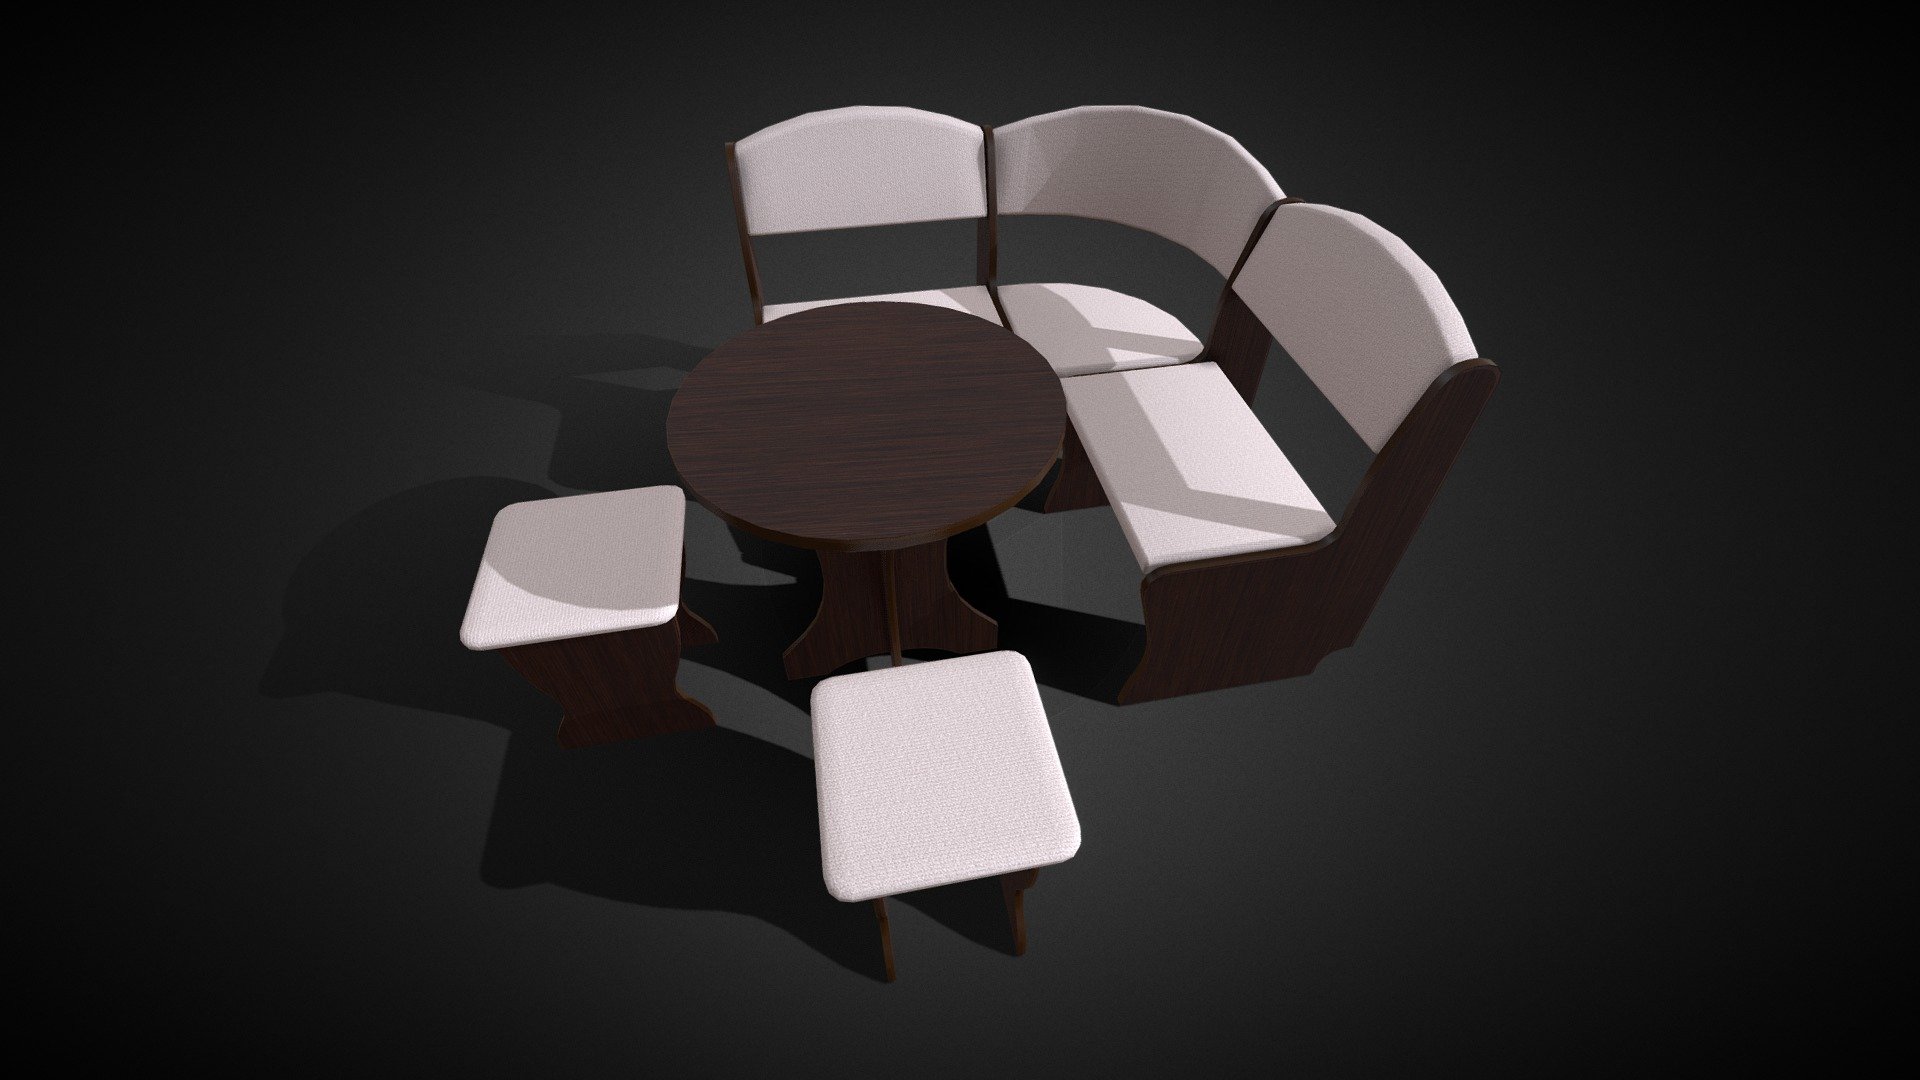 Dining area model (corner sofa, table and chair). The model has a single PBR texture with a resolution of 2048x2048. The total number of triangles is 2504.

Additional archive contains: FBX, OBJ and blend files. As well as JPG, PNG (+MetallicSmoothness for Unity) texture 3d model